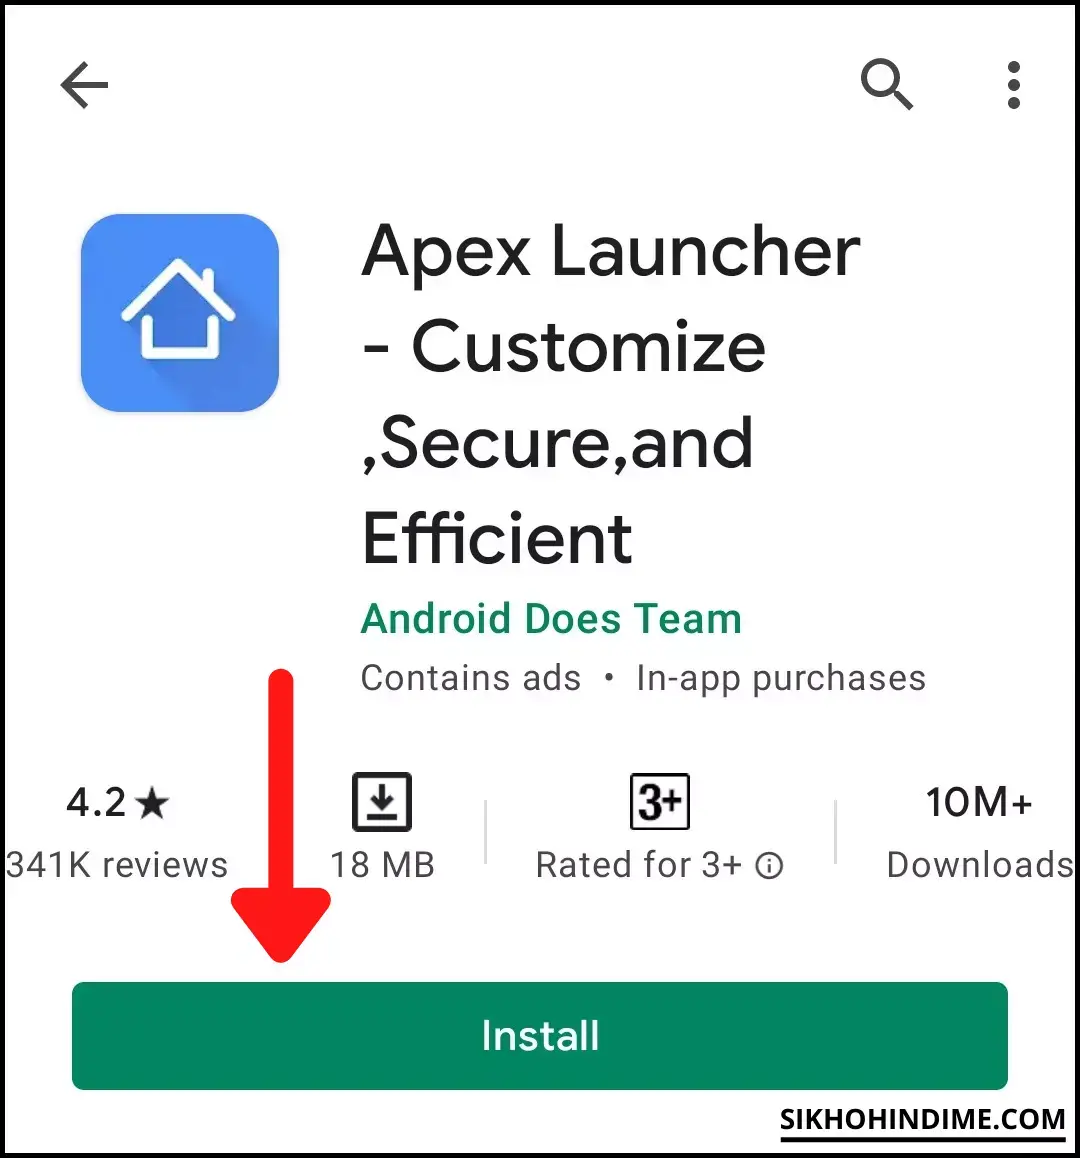 Click on Install Apex Launcher